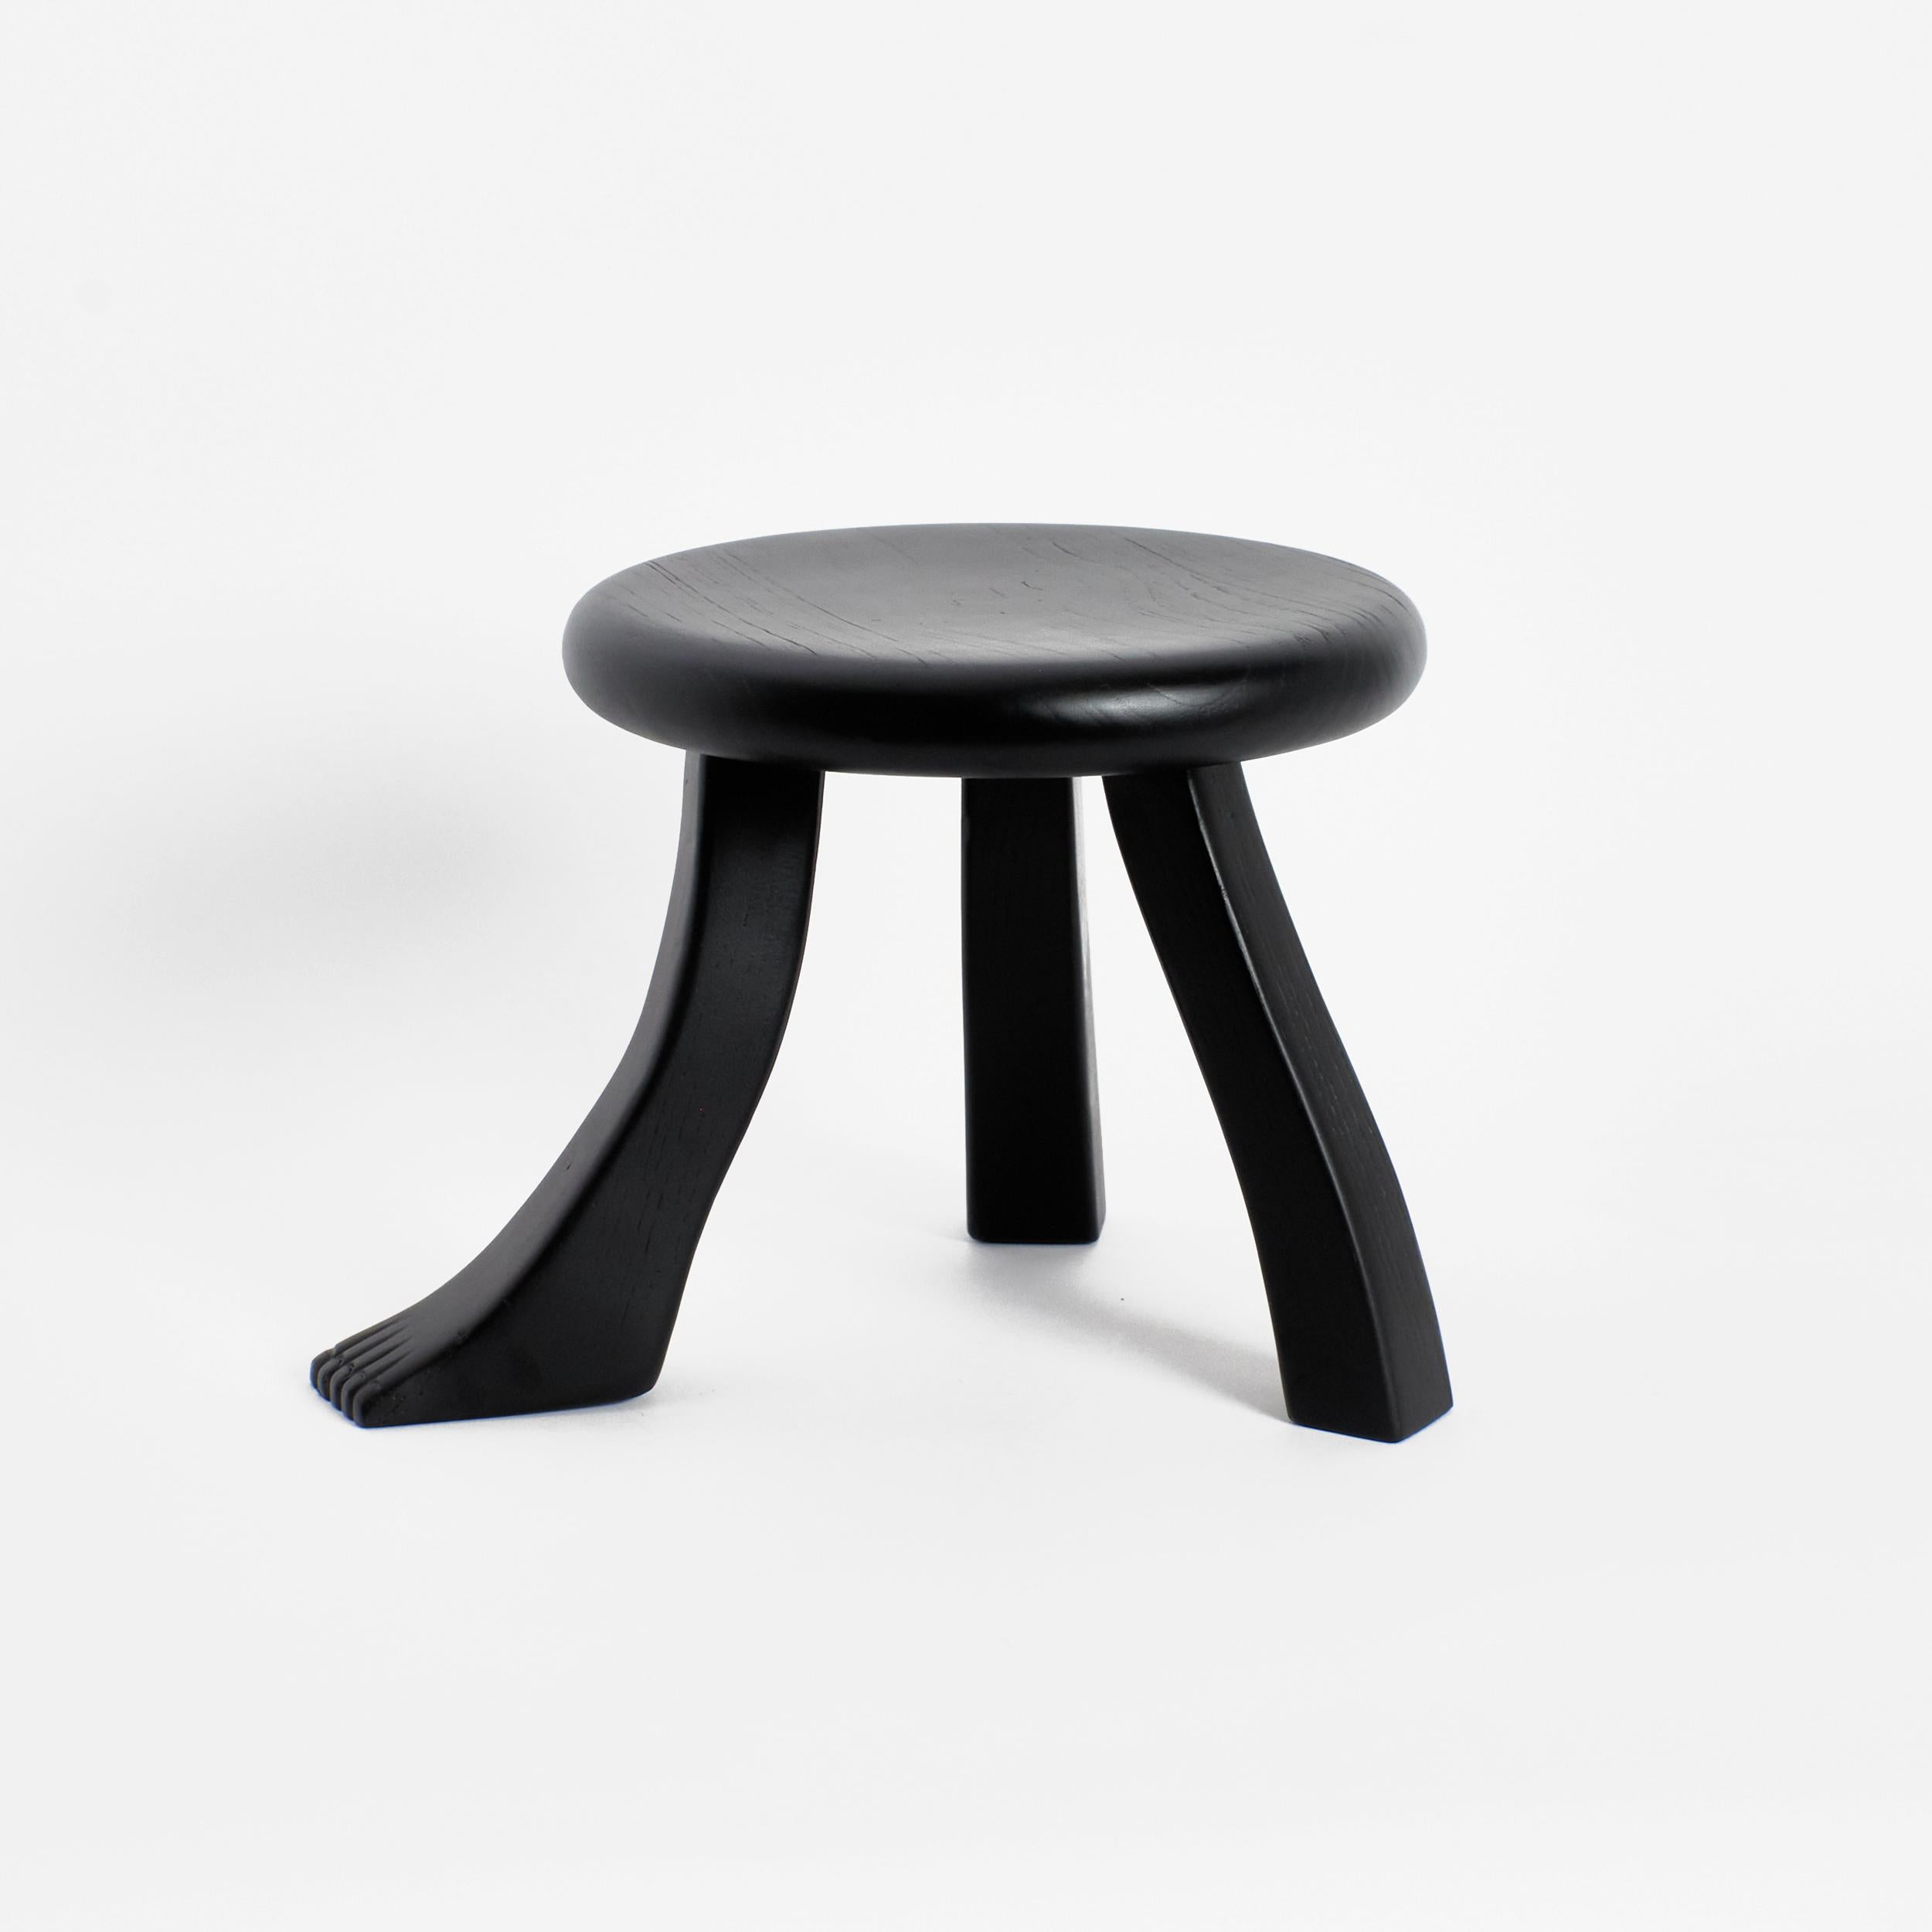 Hand-Carved Foot Stool in Black For Sale